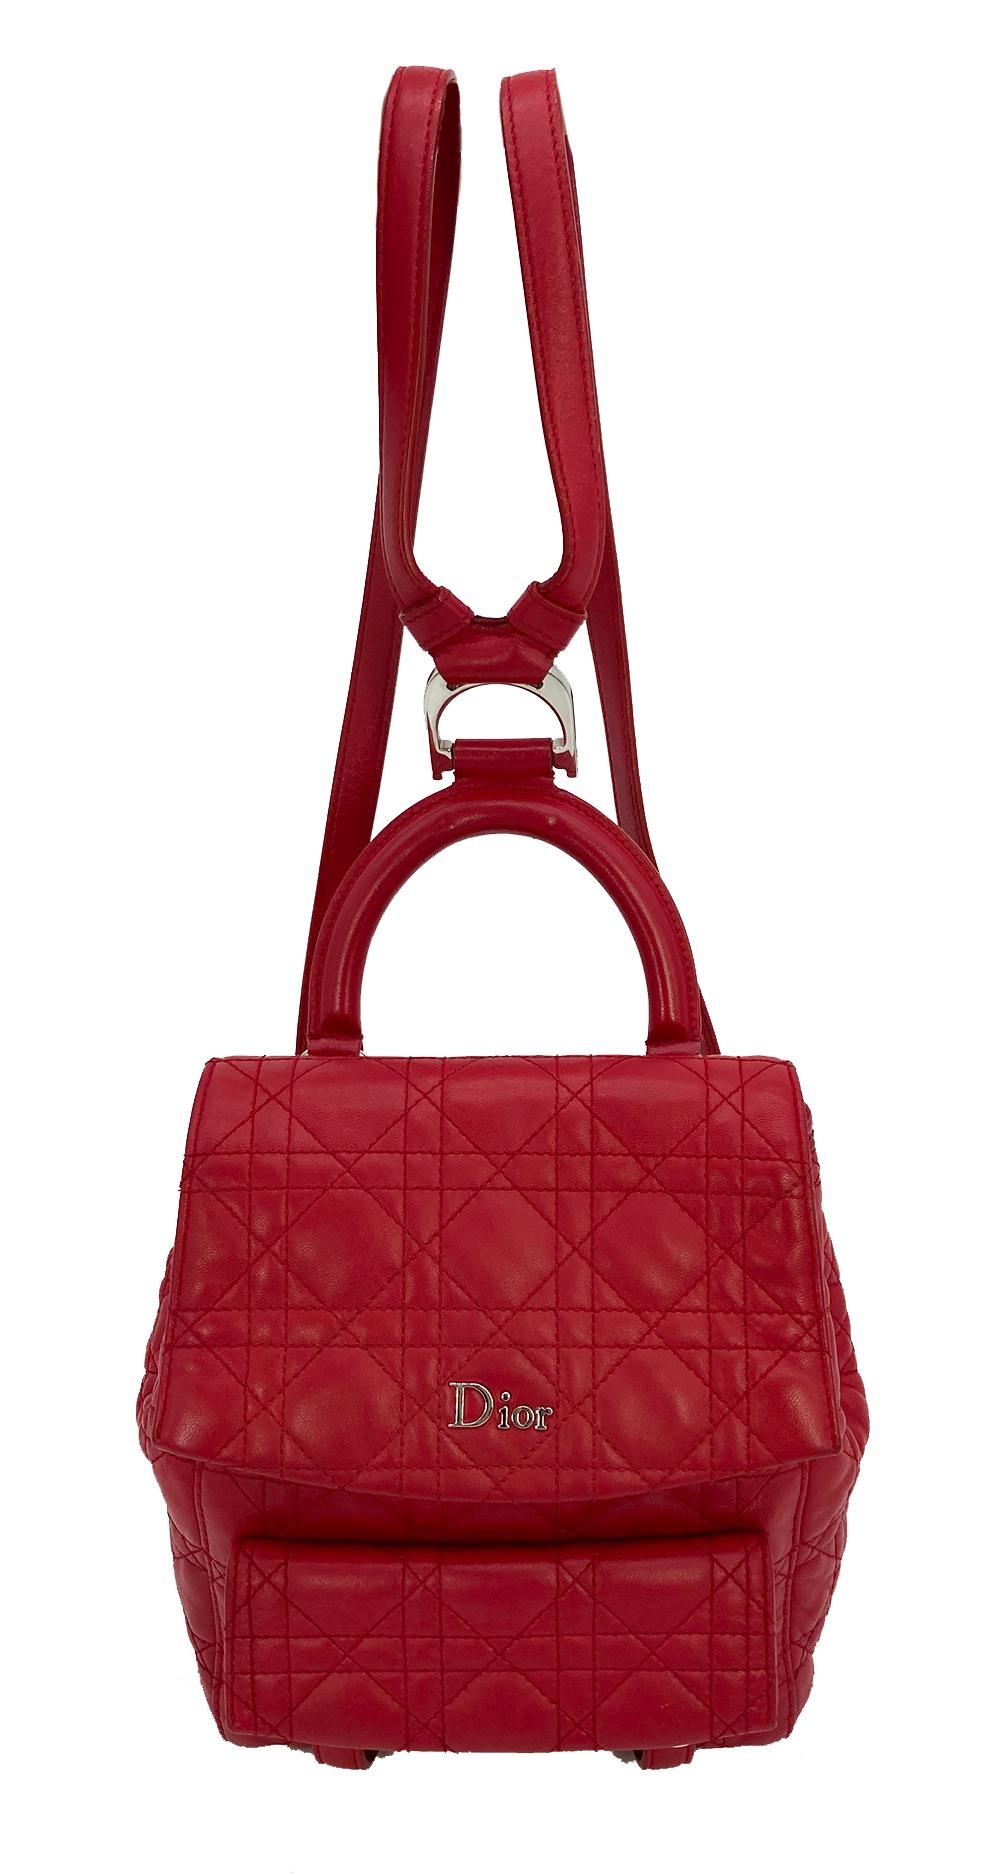 Christian Dior Red Cannage Quilted Leather Stardust Backpack in excellent condition. Cherry red lambskin leather exterior in siganature cannage quilt pattern trimmed with silver hardware. Double adjustable back straps and top handle with D ring logo